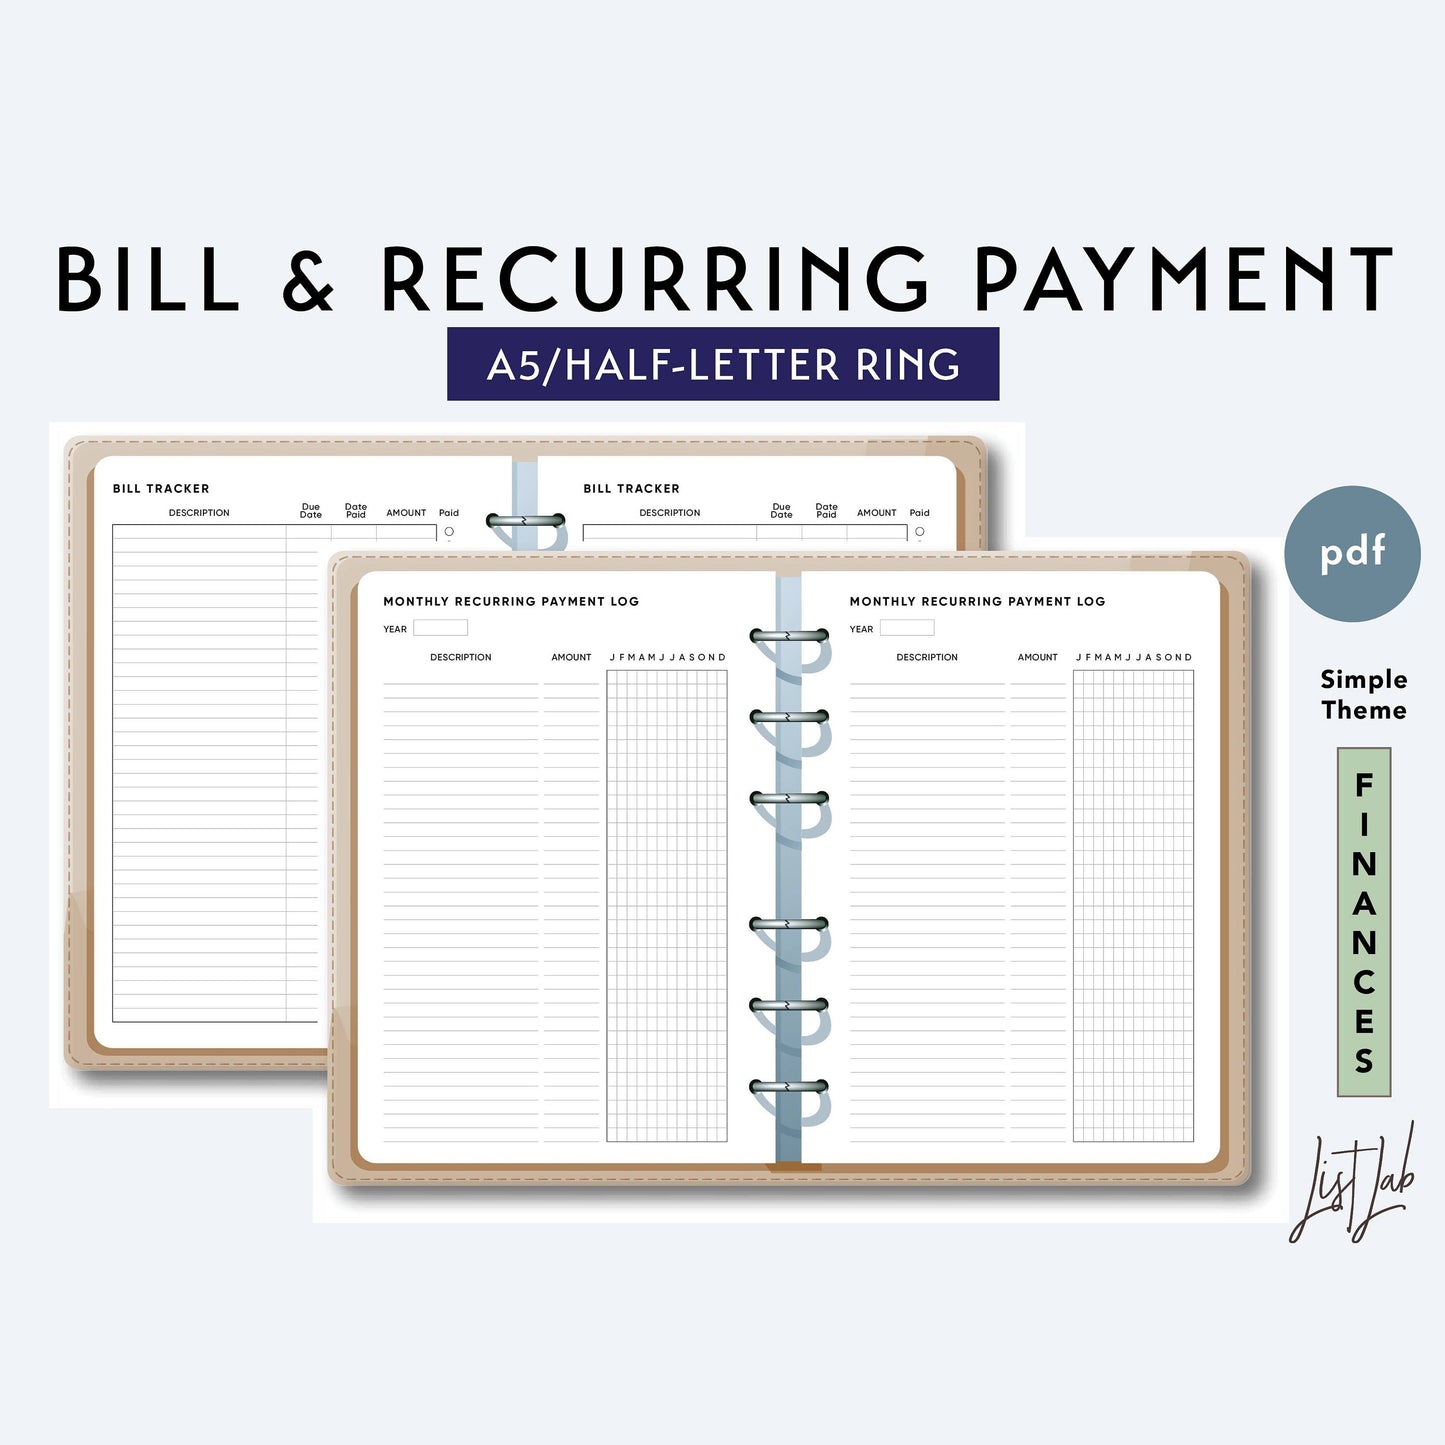 A5 / Half-Letter Ring BILL TRACKER & RECURRING PAYMENT LOGS  Printable Set